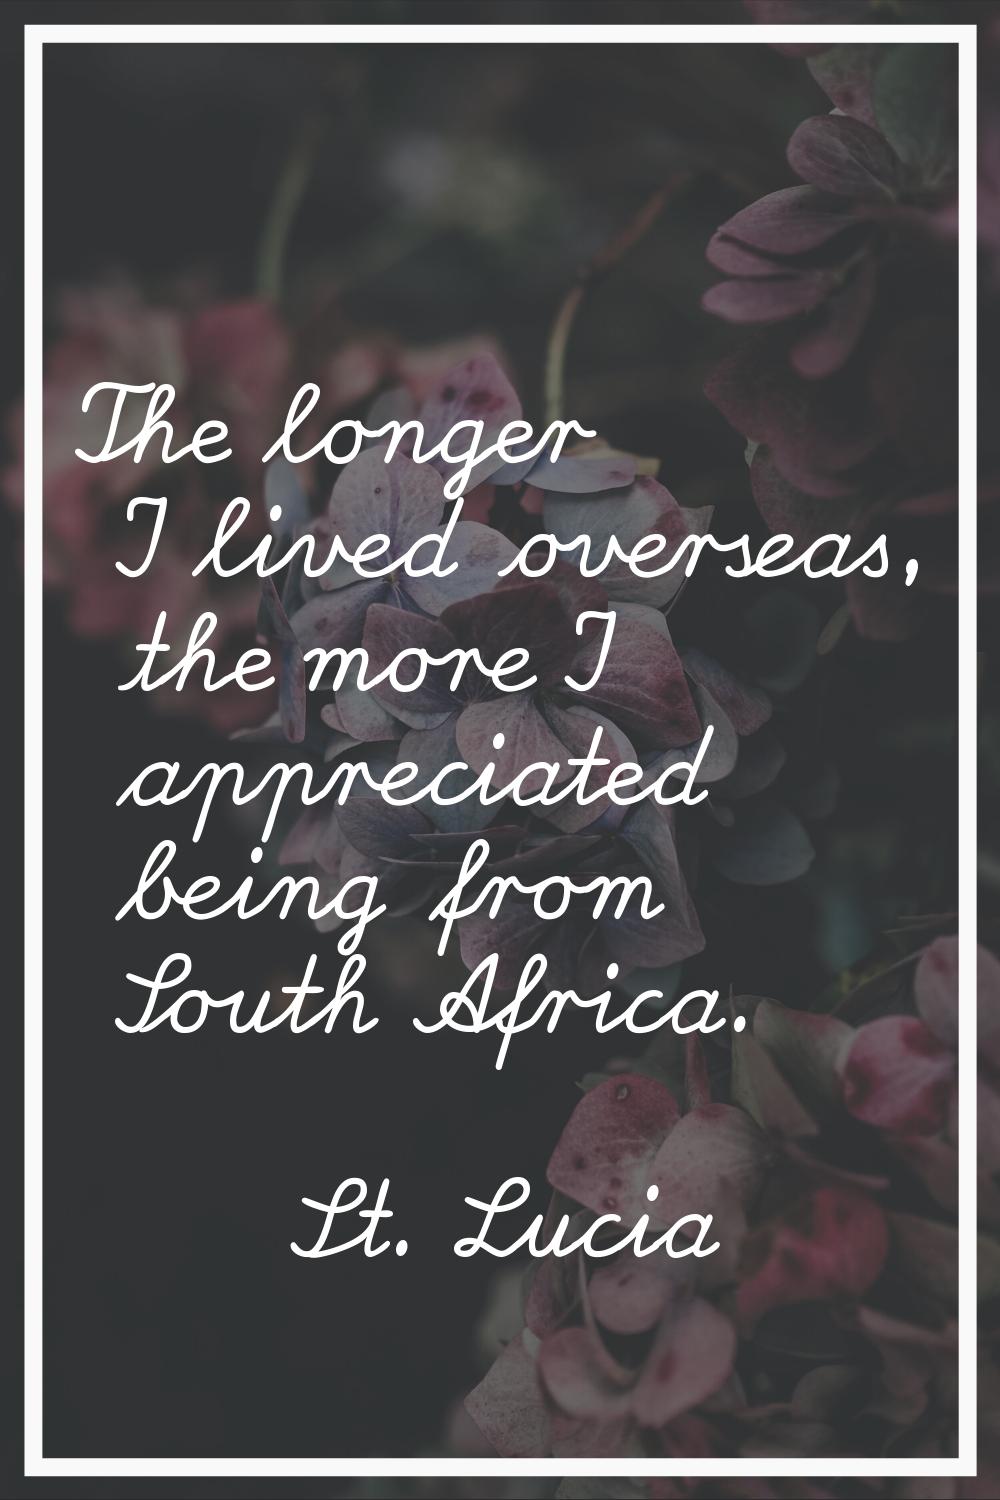 The longer I lived overseas, the more I appreciated being from South Africa.